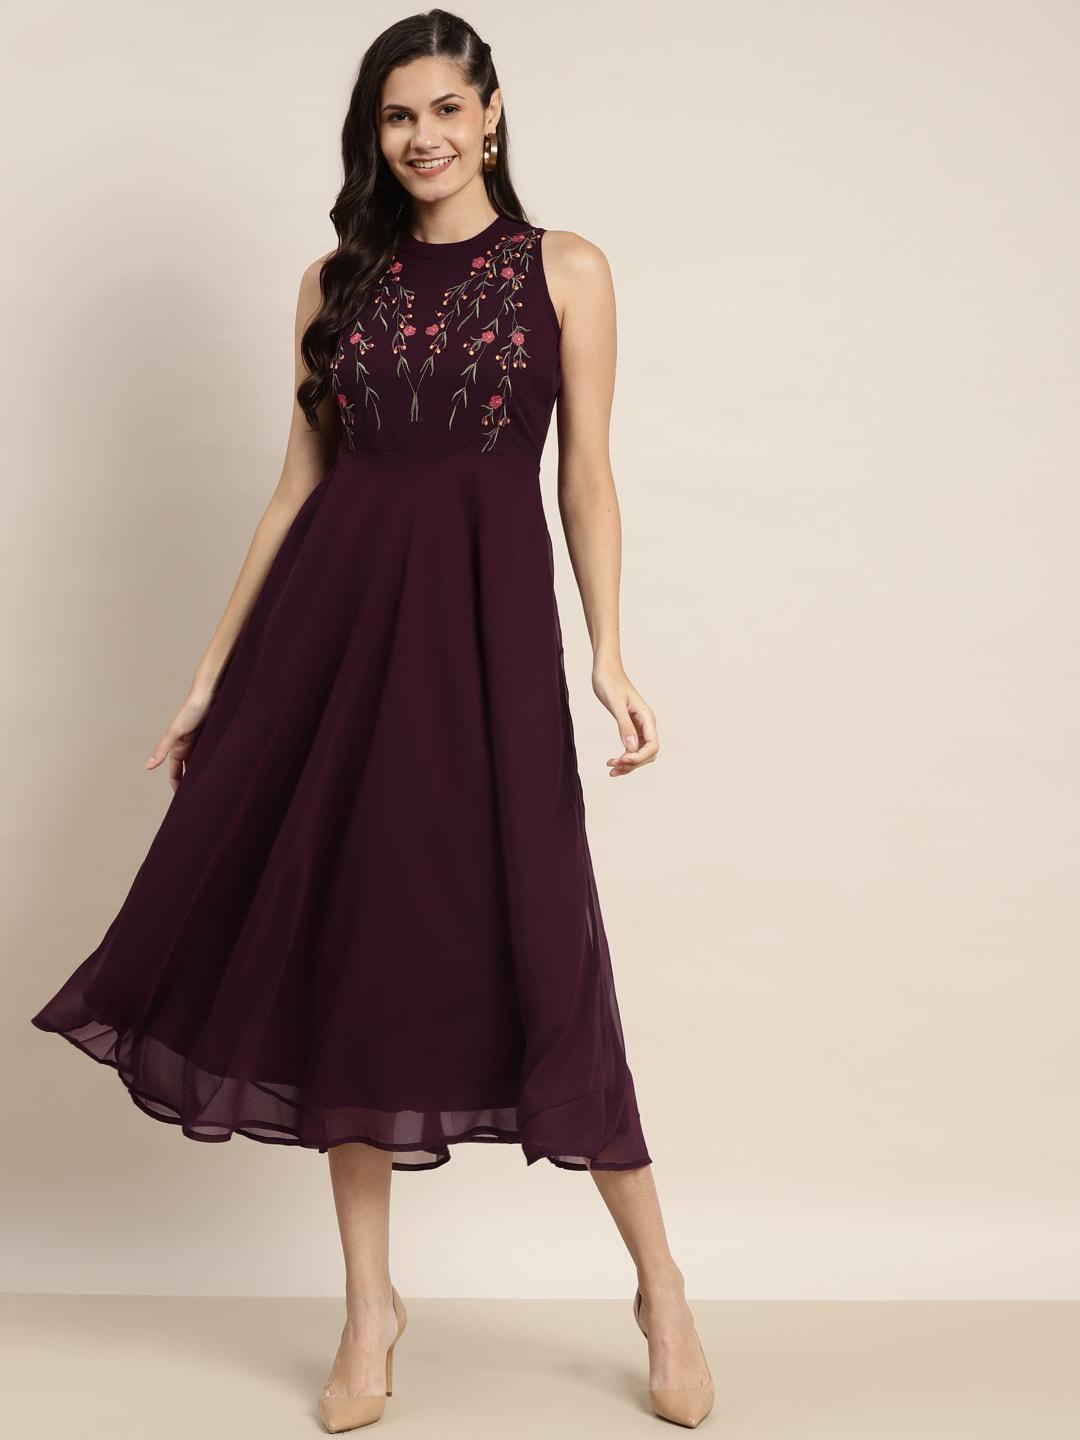 jompers-purple-&-pink-floral-embroidered-a-line-midi-dress